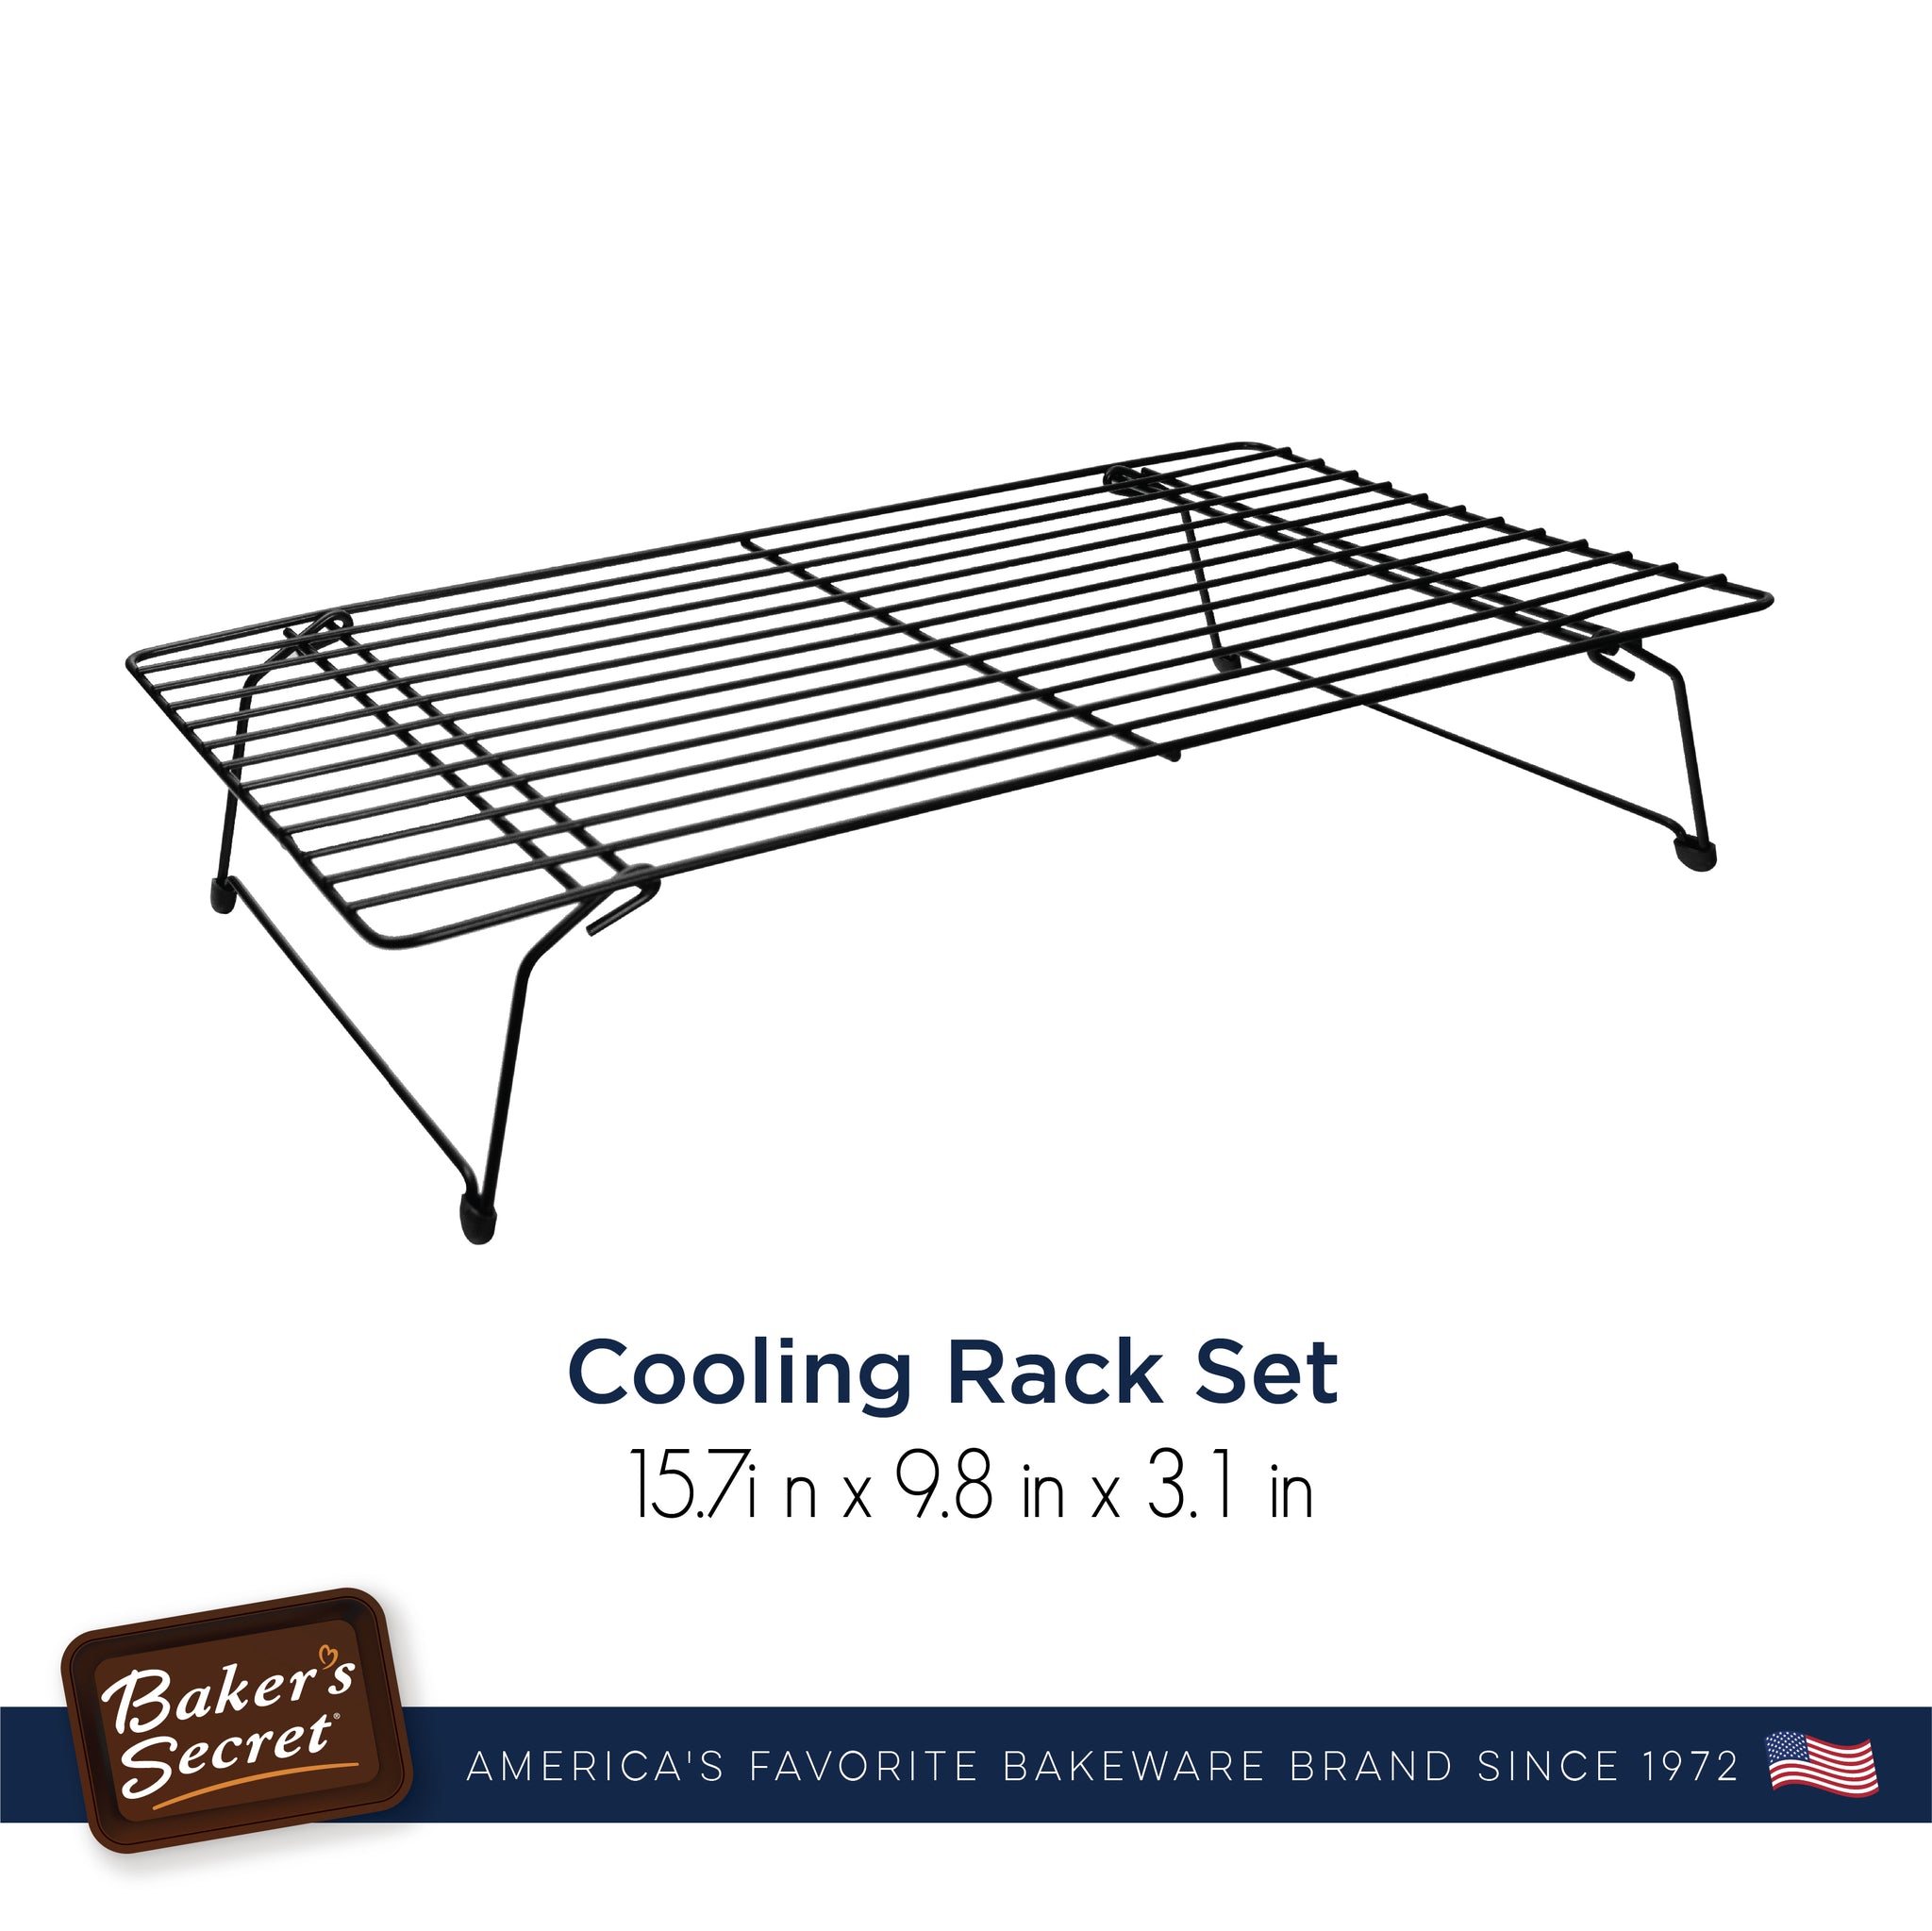 Nordic Ware Baking and Cooling Rack Set- Silver, 3 Piece - Harris